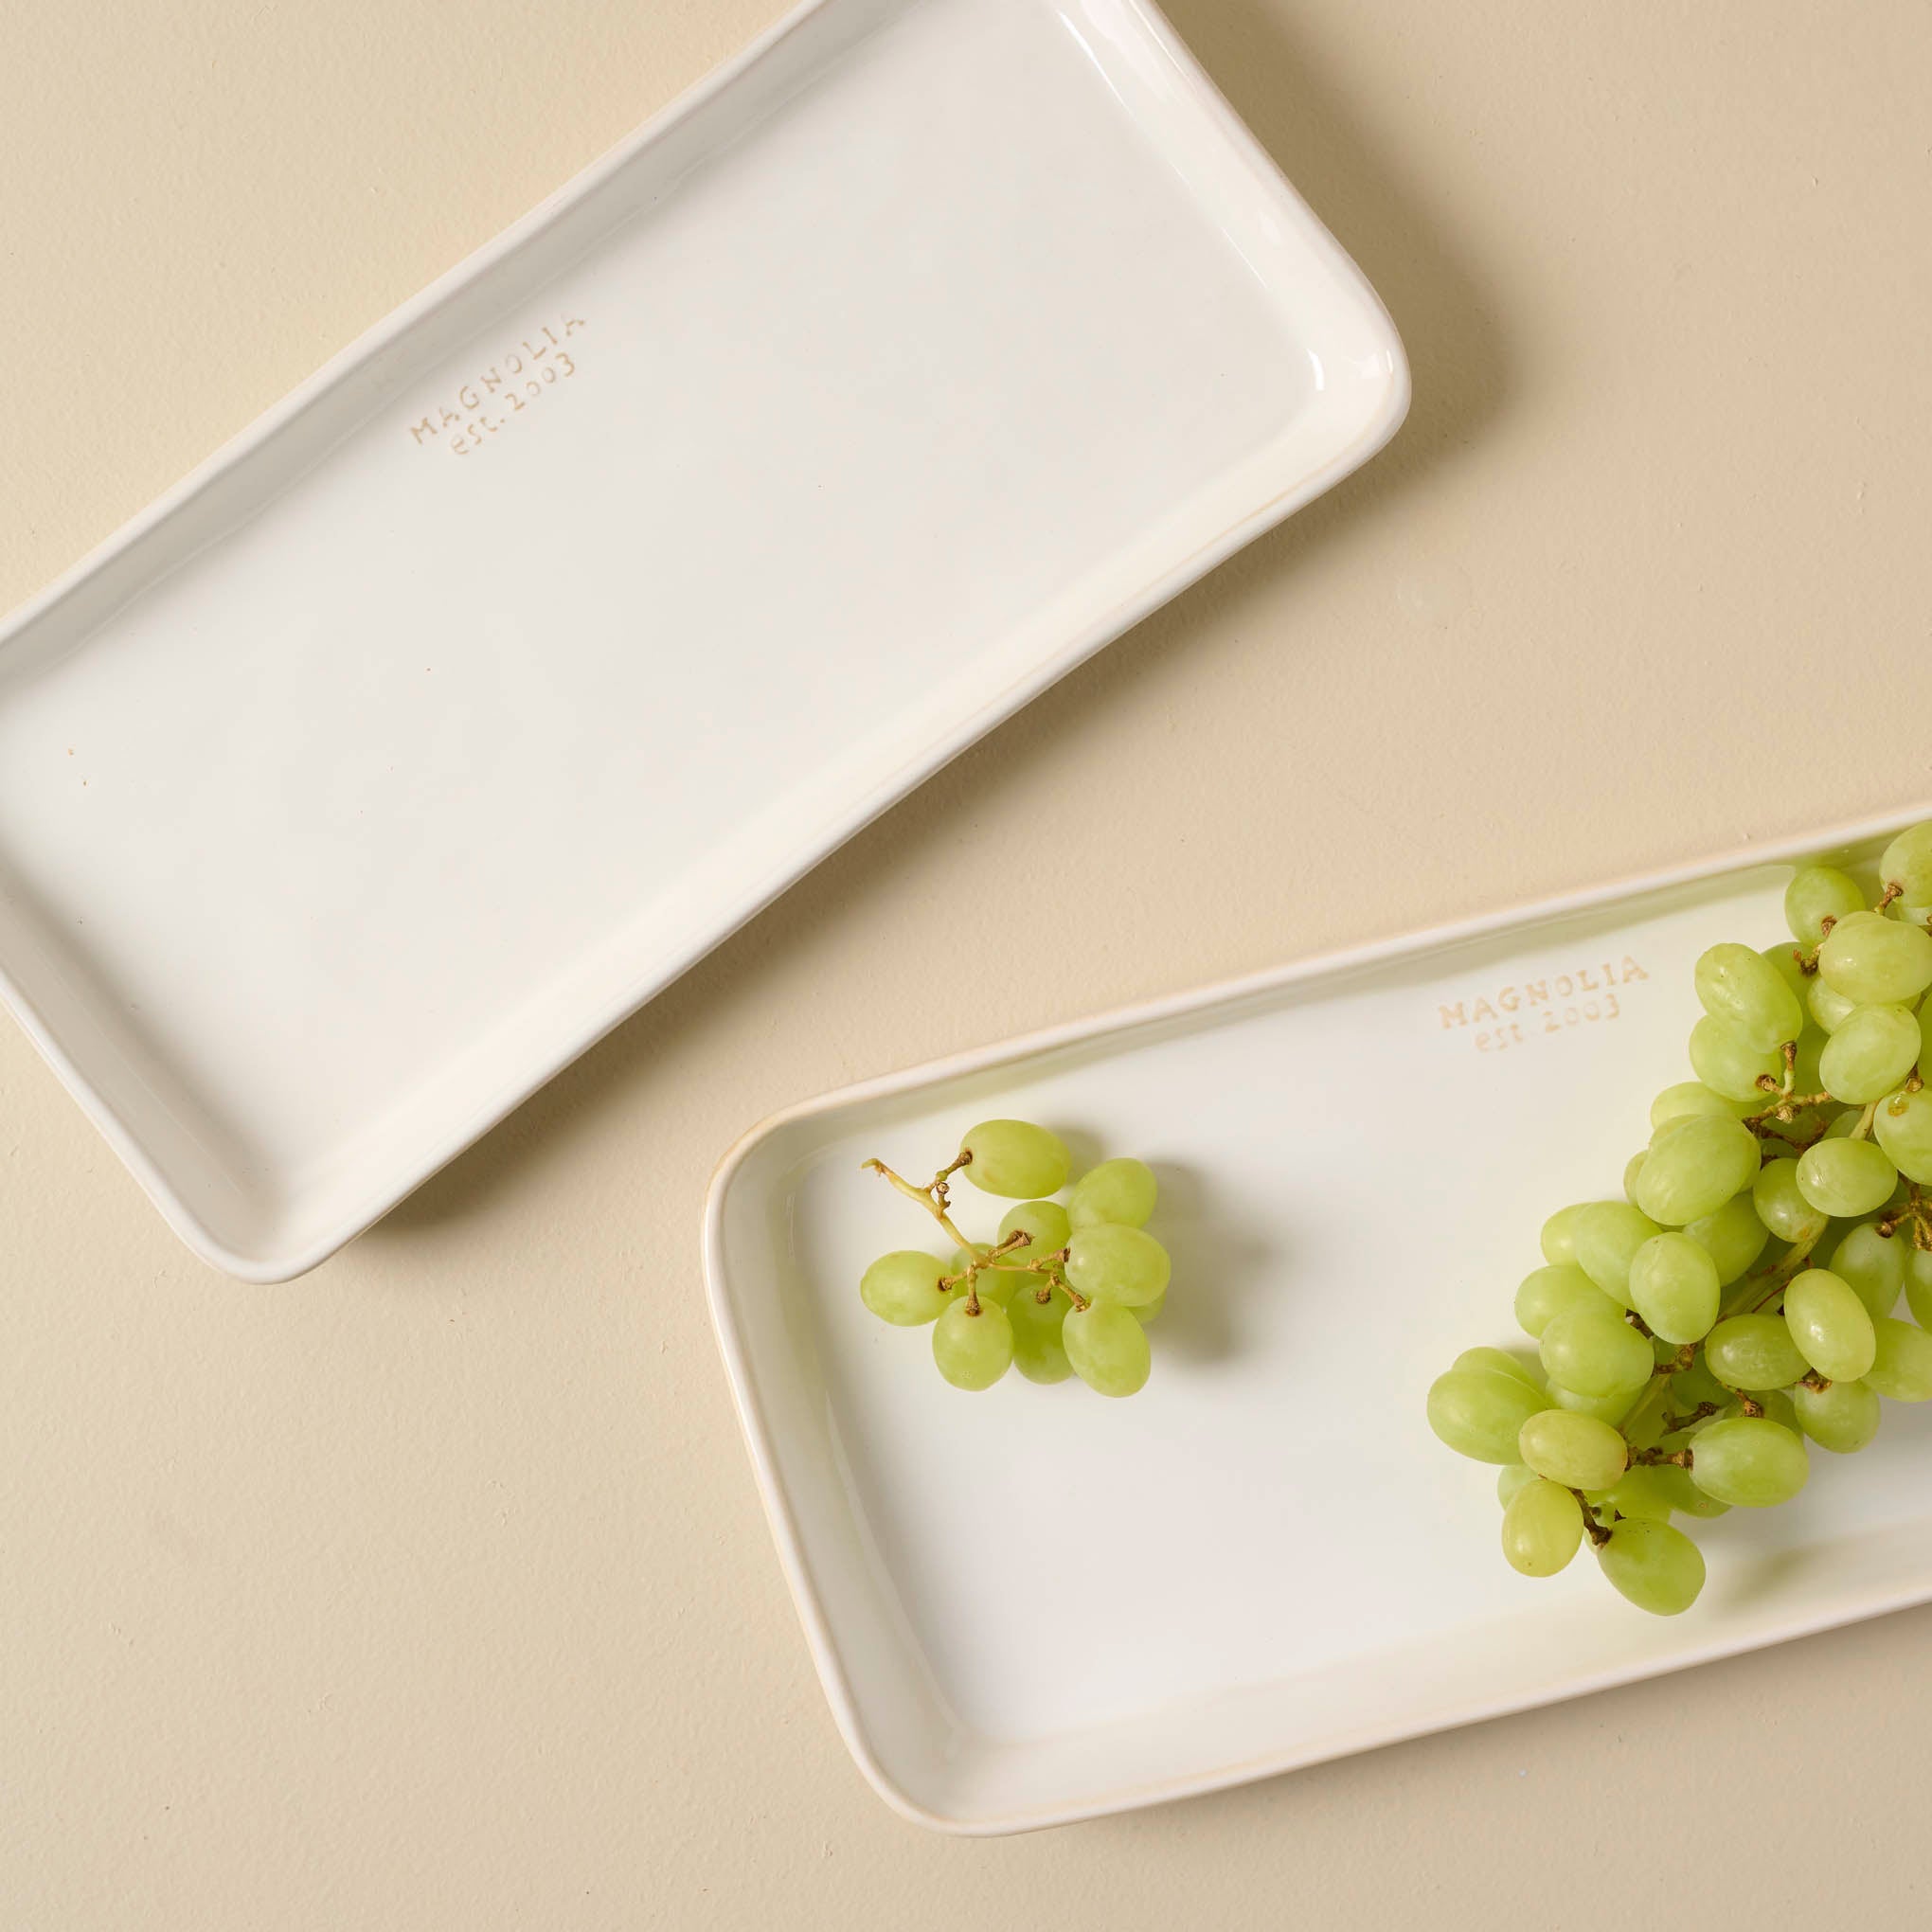 Magnolia Est. Ceramic Rectangular Platter with green grapes Items range from $26.00 to $34.00